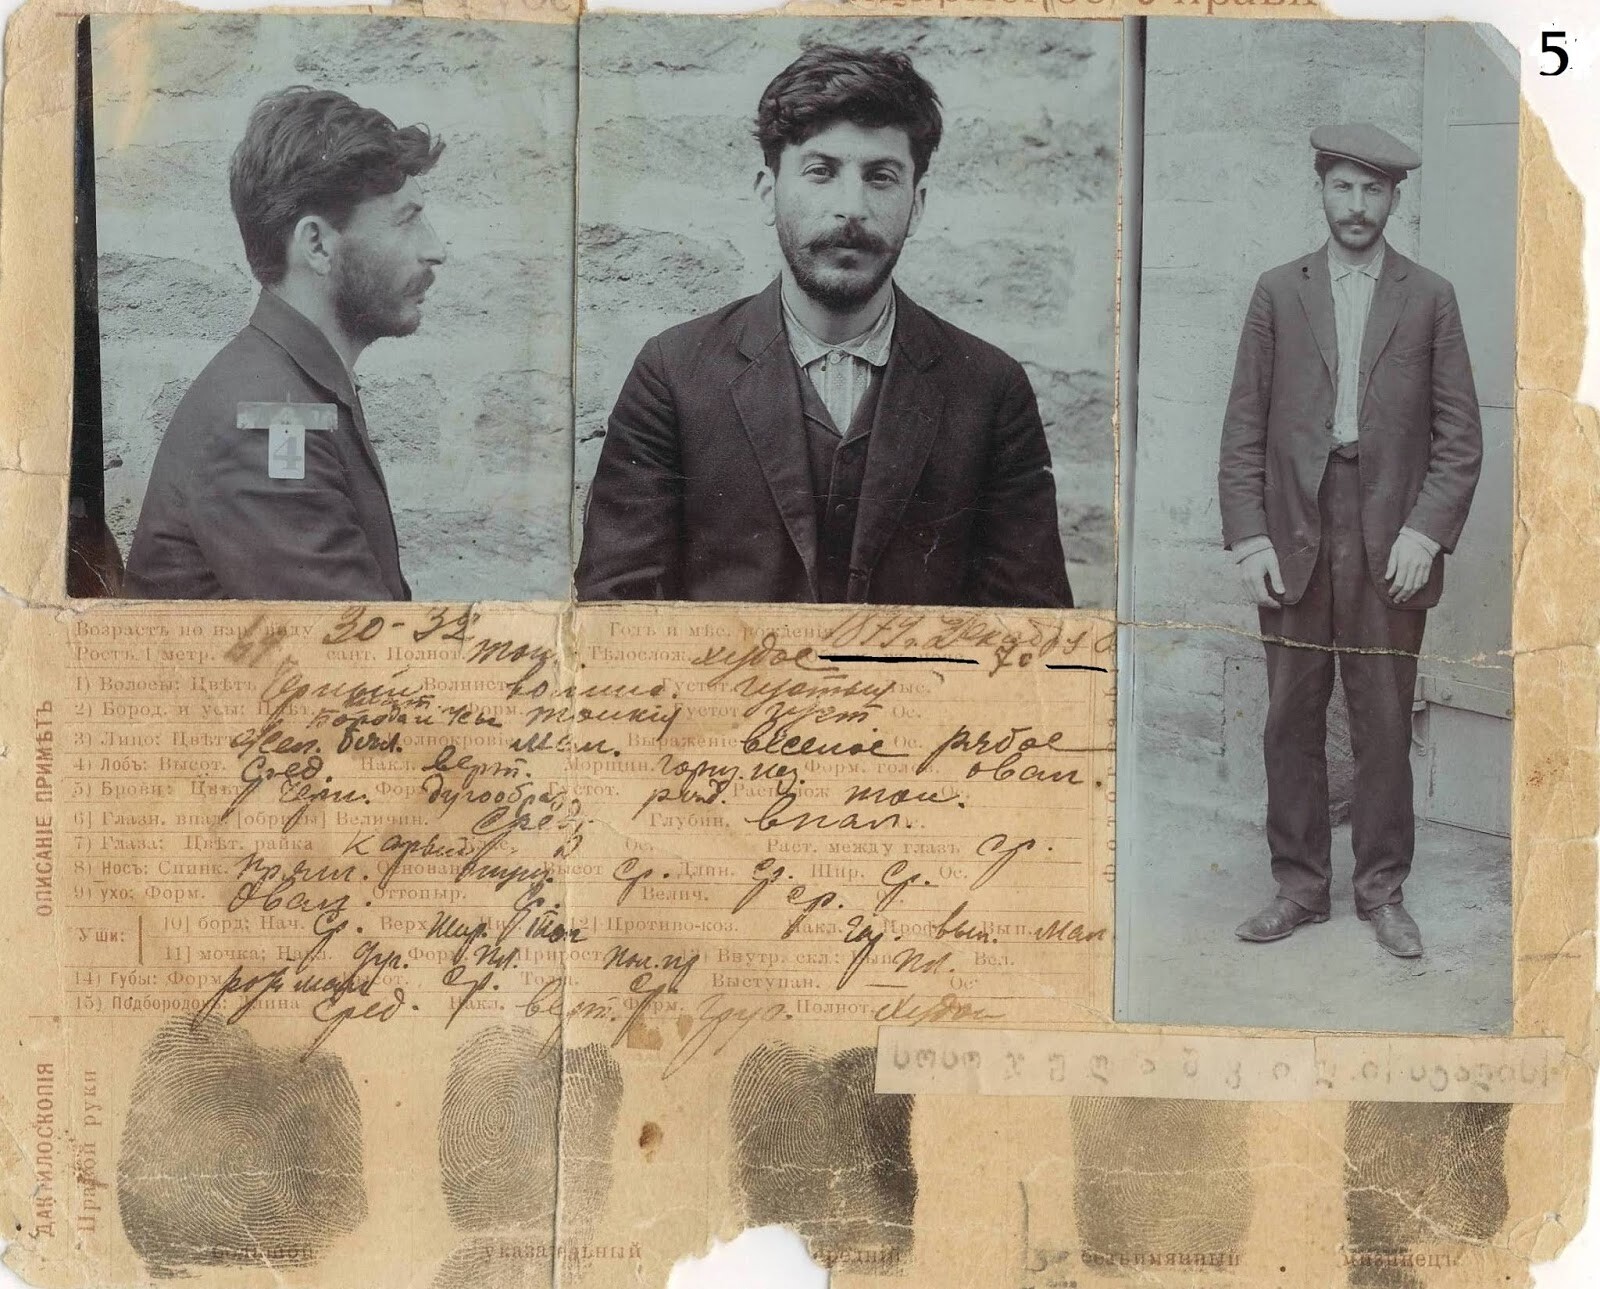 Copy of a criminal filei, created by the police of the Russian Empire in Baku following Dzhugashvili's arrest in 1910.